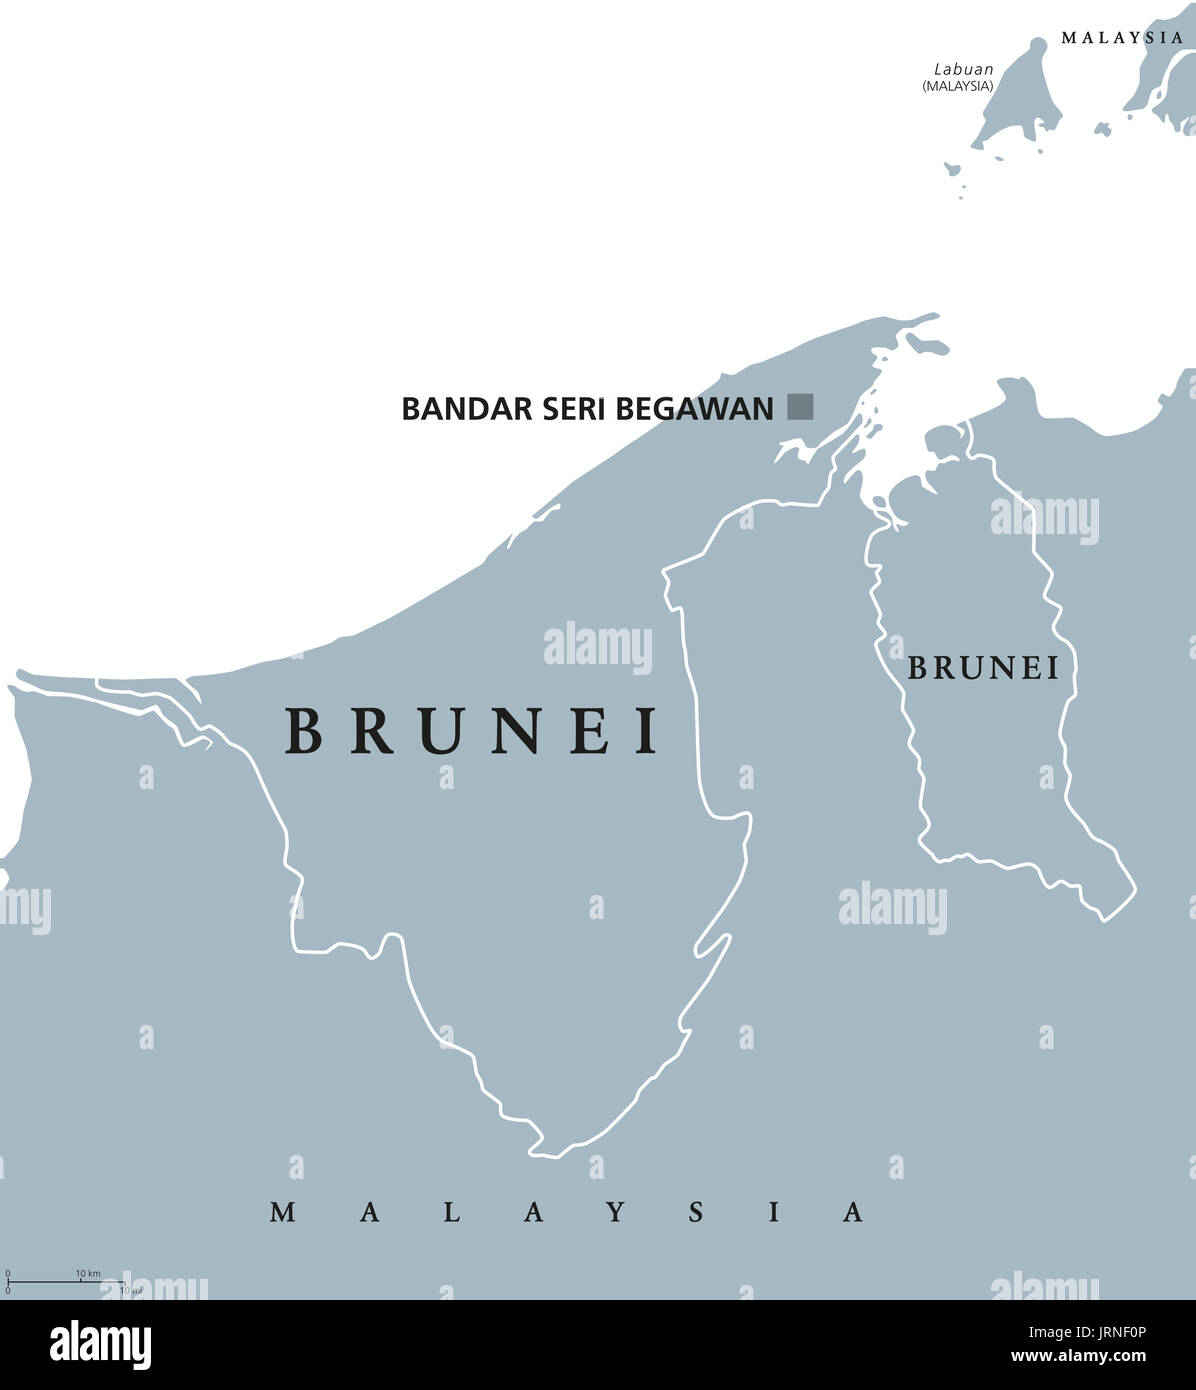 Brunei political map with capital Bandar Seri Begawan. English labeling. The Nation of Brunei, the Abode of Peace. Country in Asia. Illustration. Stock Photo